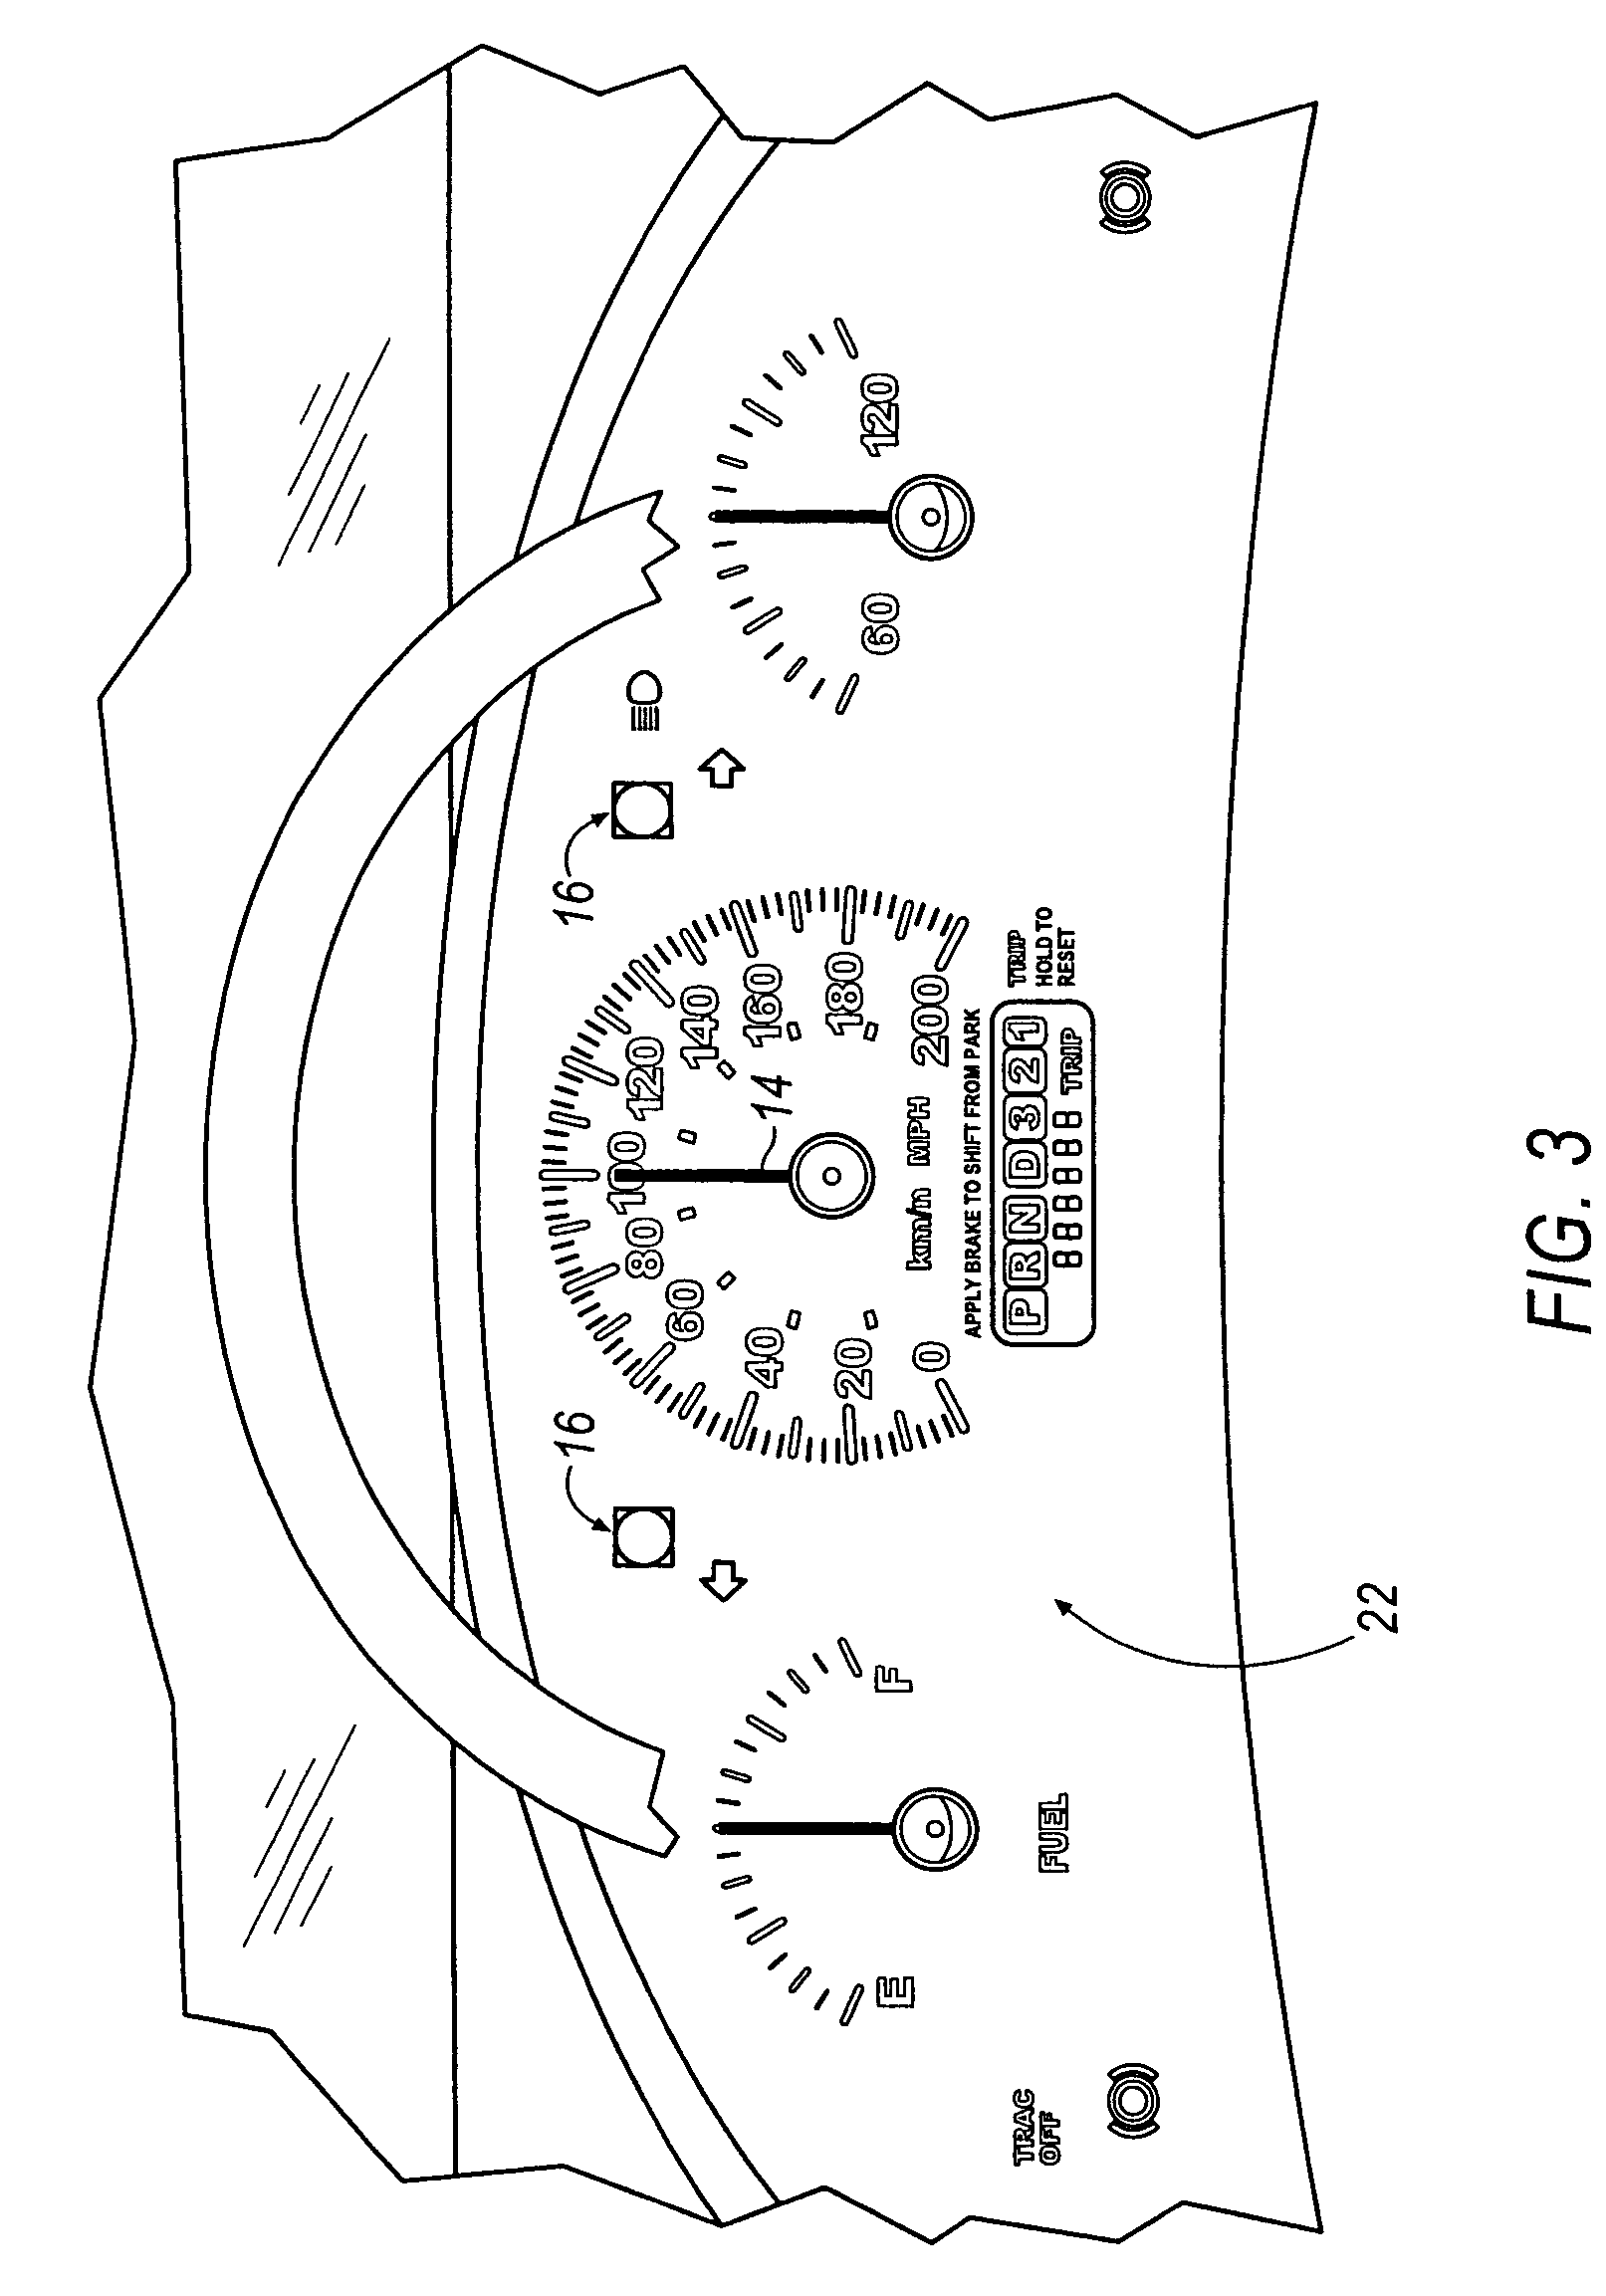 Method of mitigating driver distraction